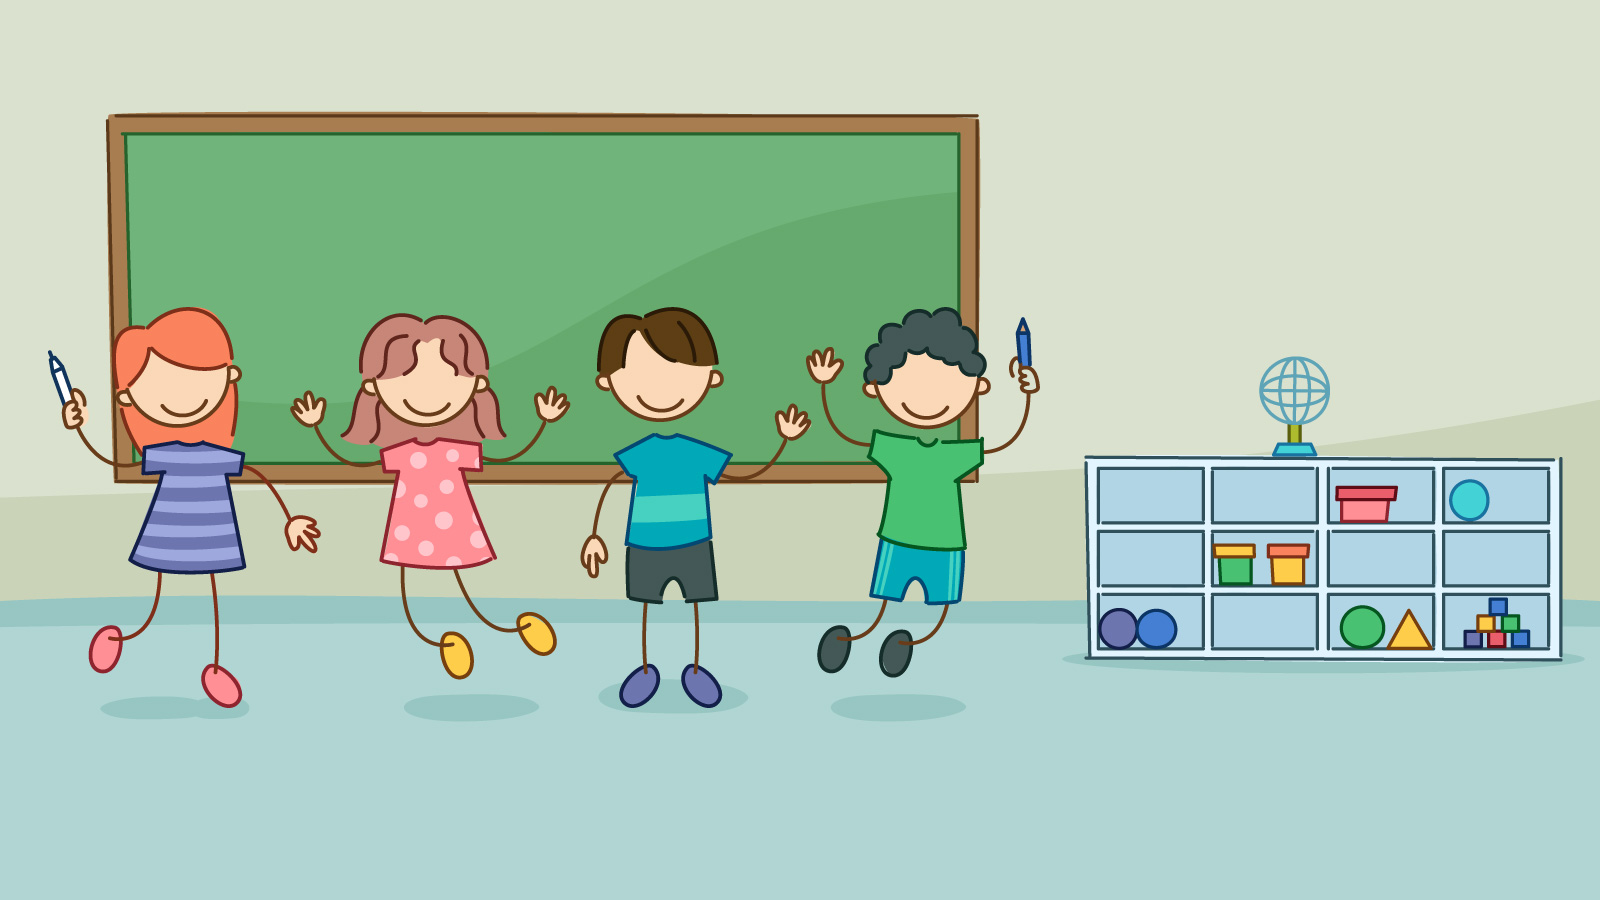 Download Unique Classroom With Kids Vectors for free.